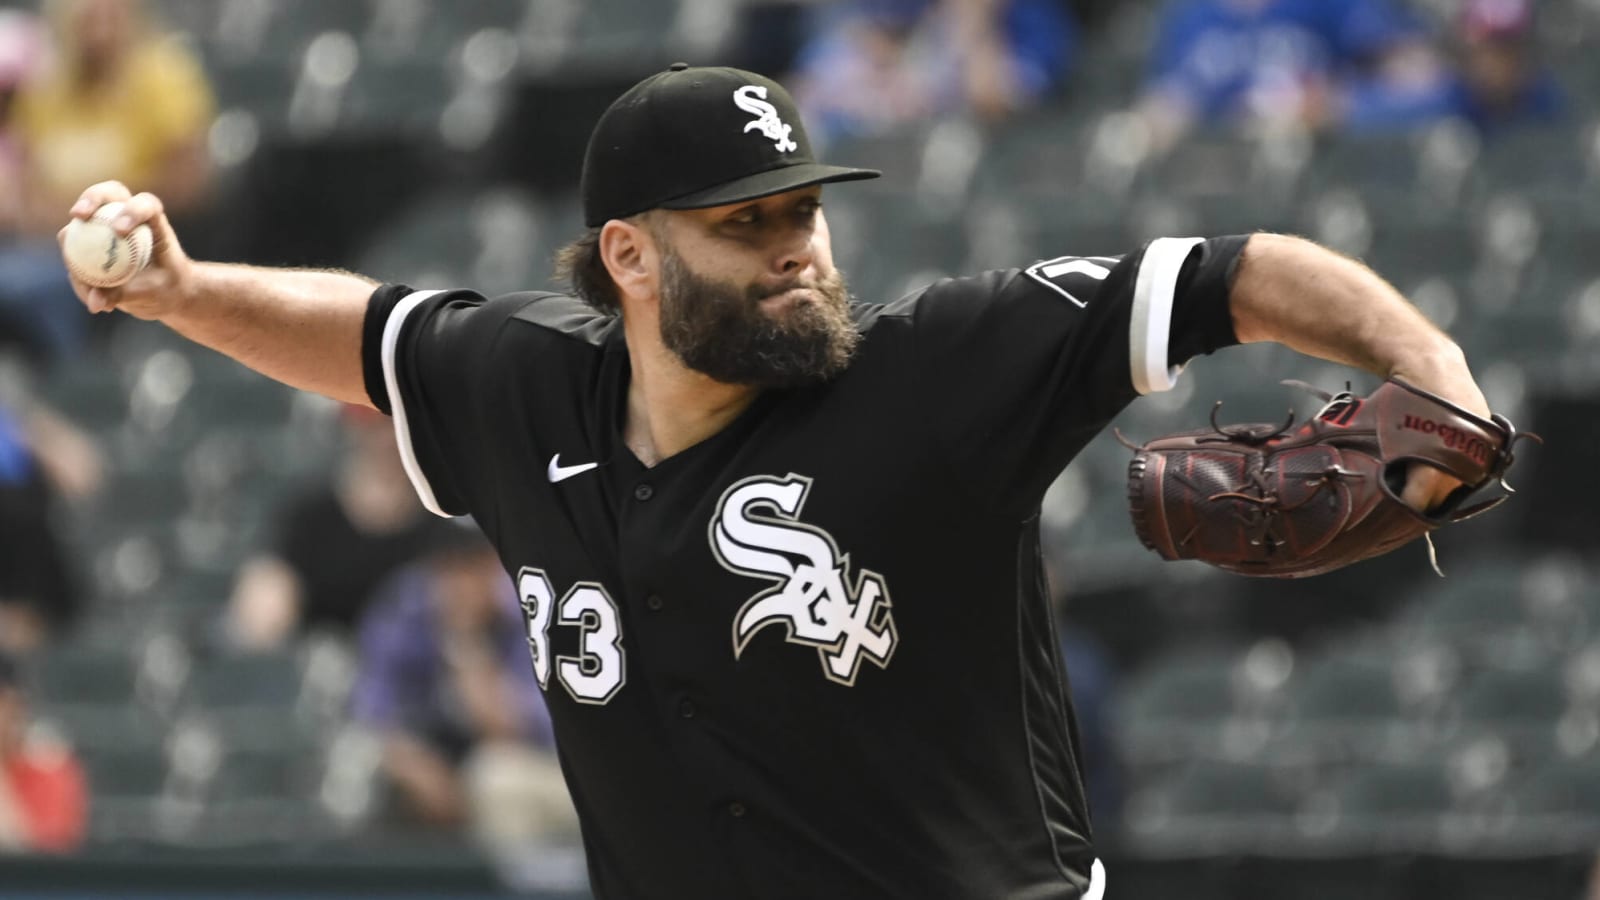 Report: White Sox could start trading their players this week